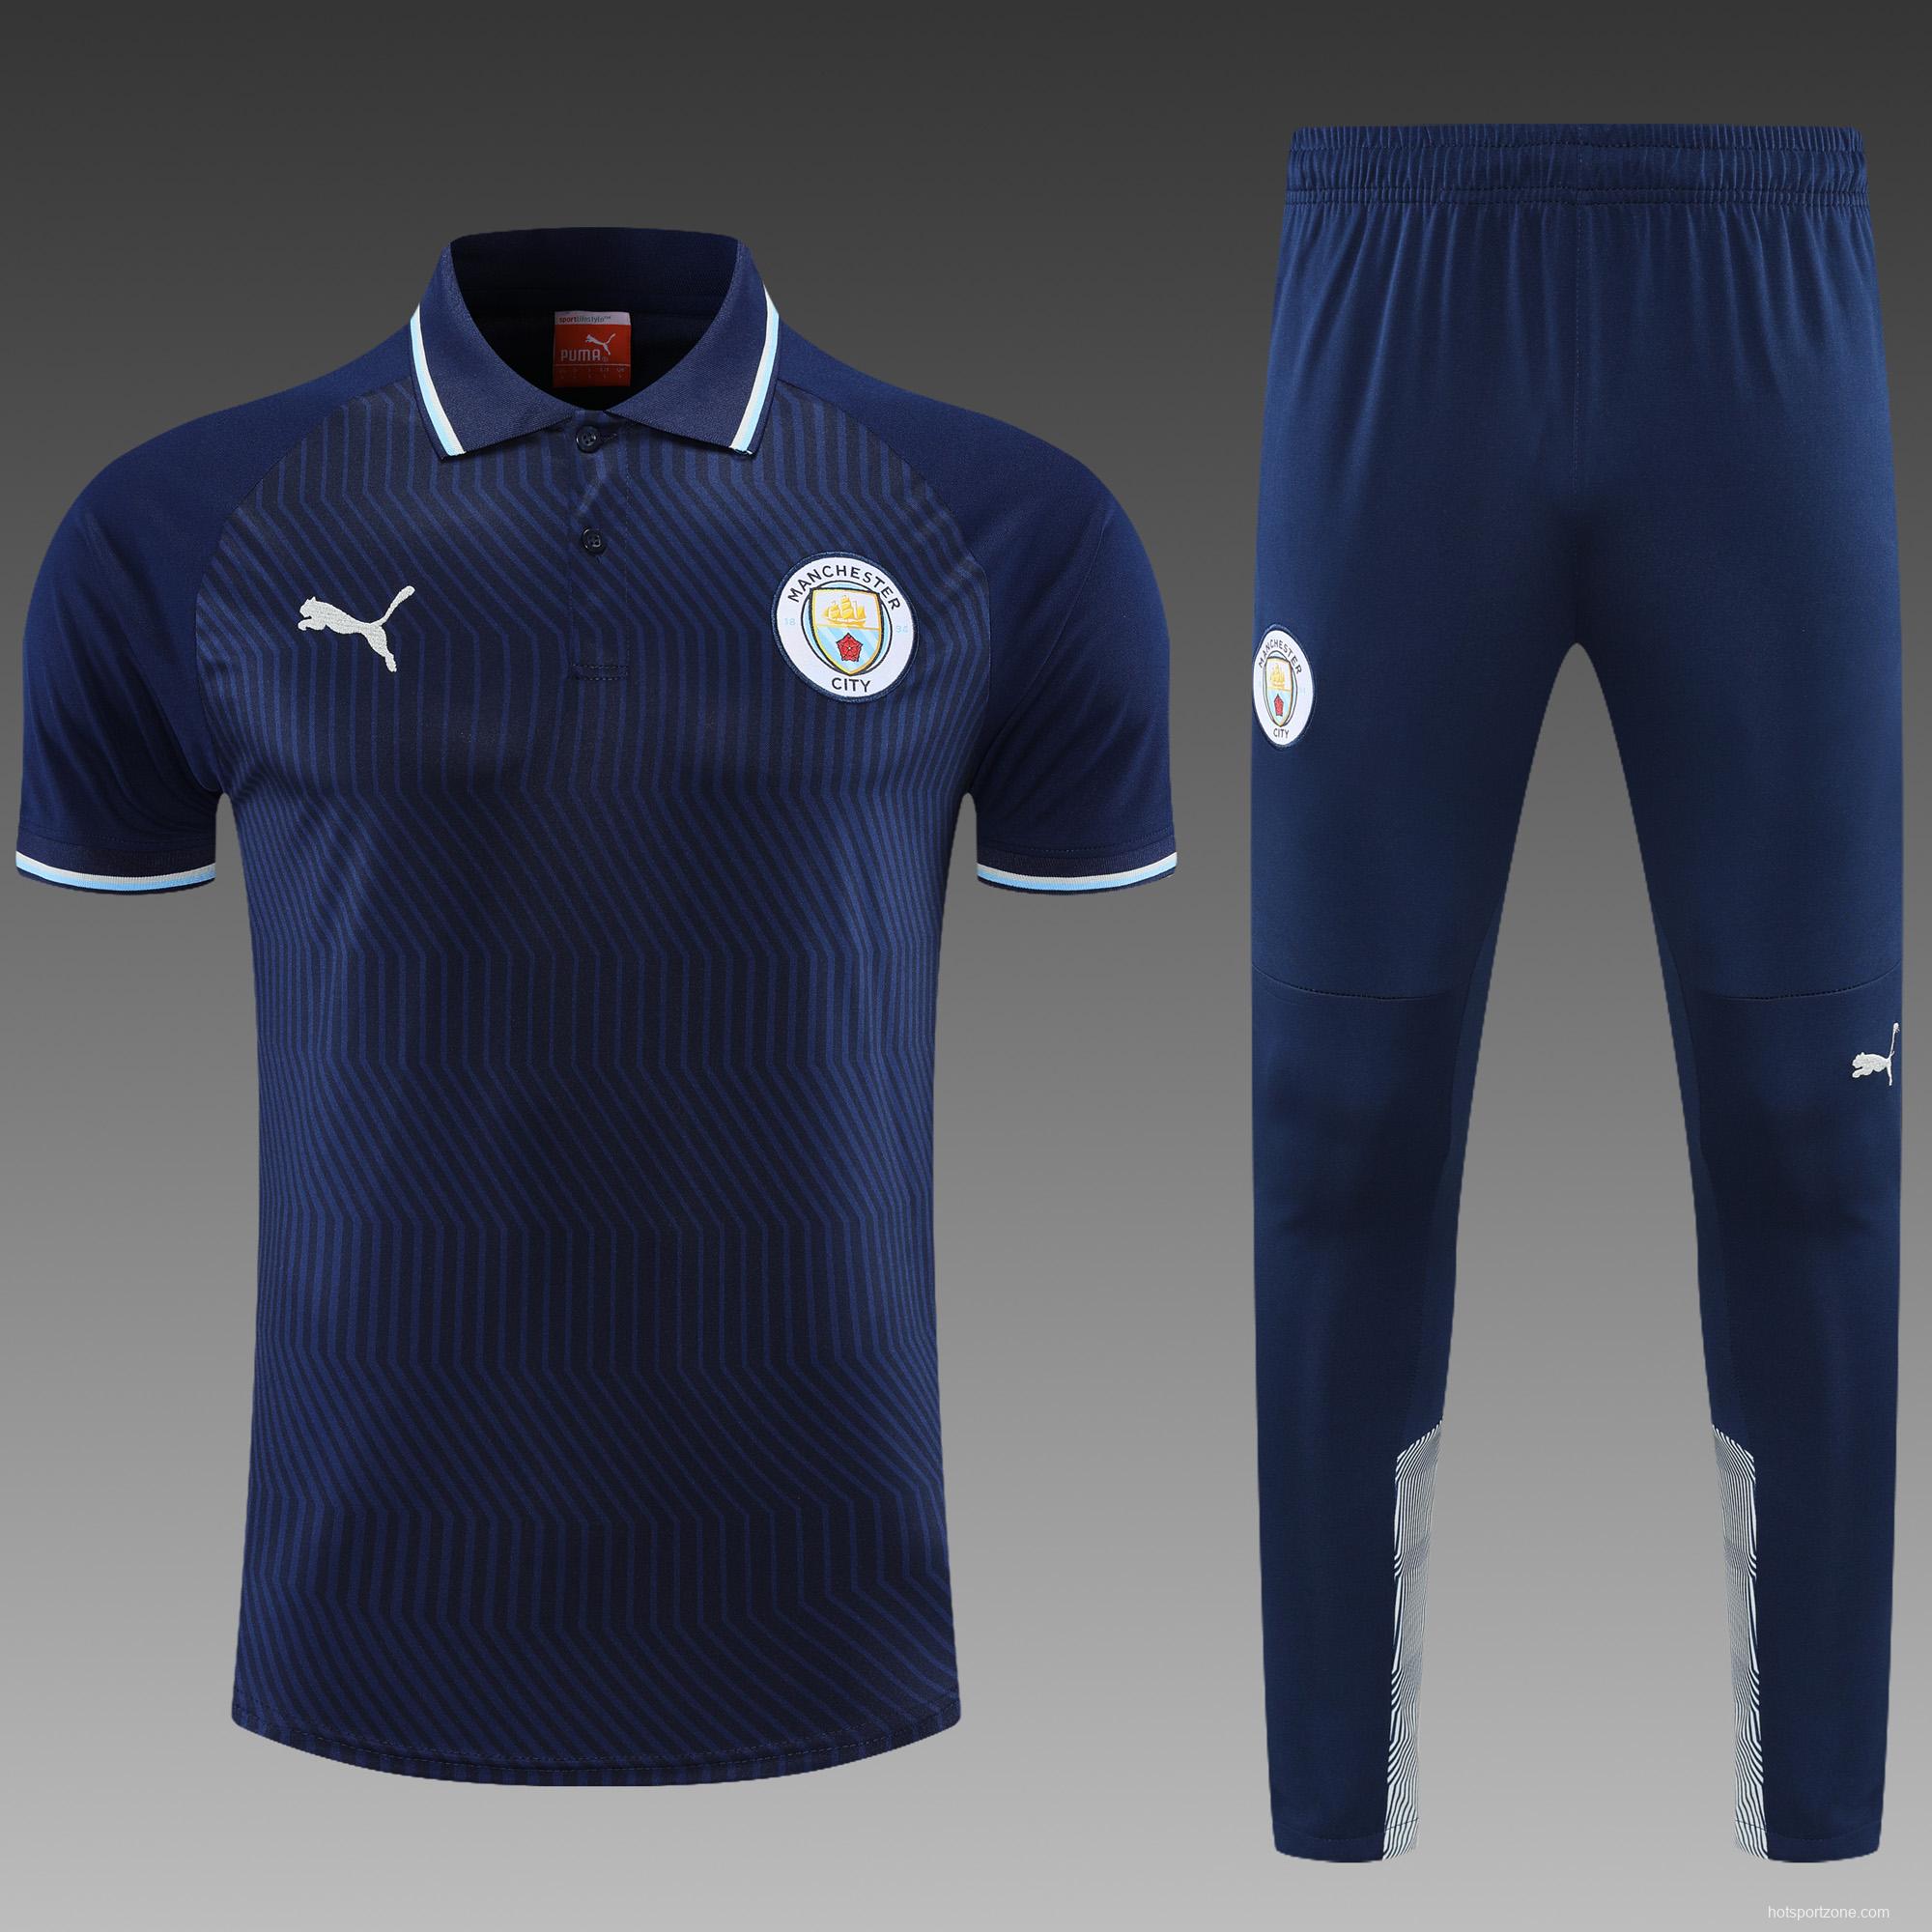 Manchester City POLO kit Dark Blue (not supported to be sold separately)